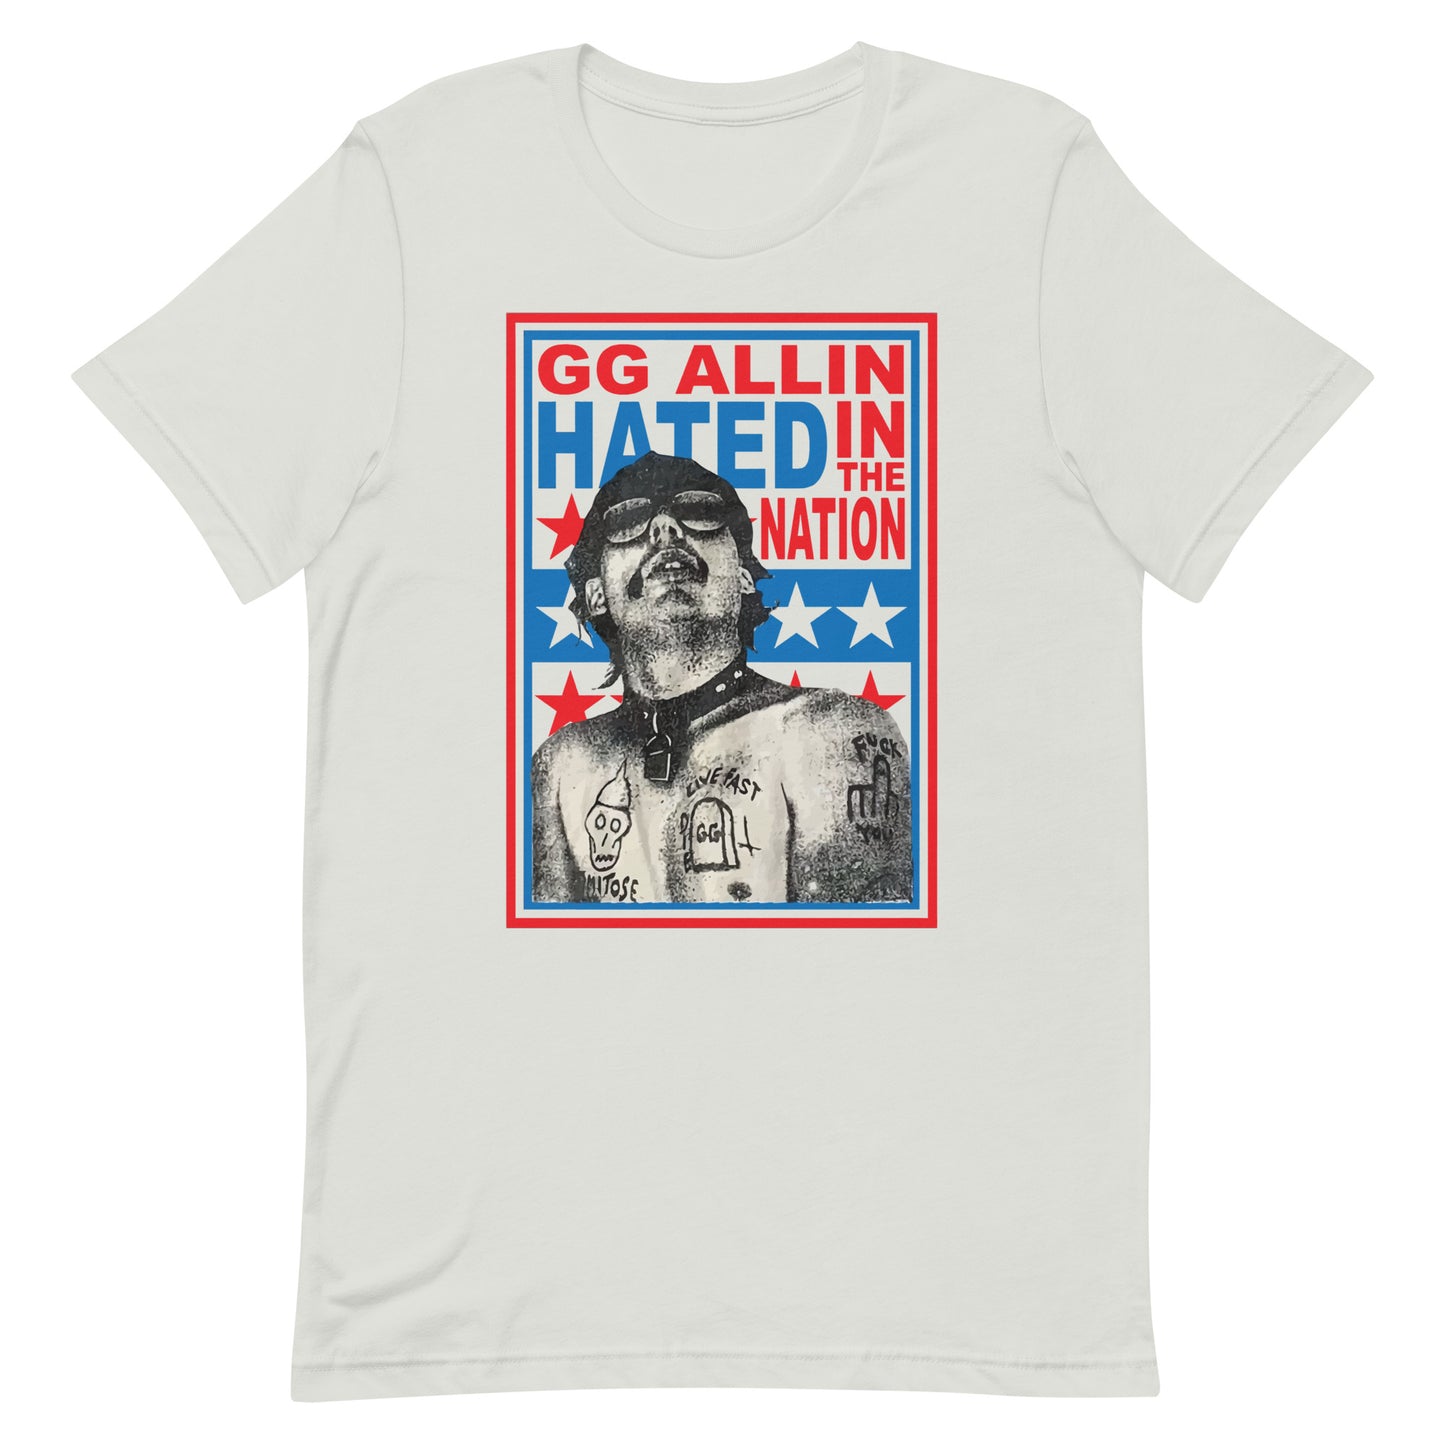 GG Allin - Hated In The Nation T-Shirt